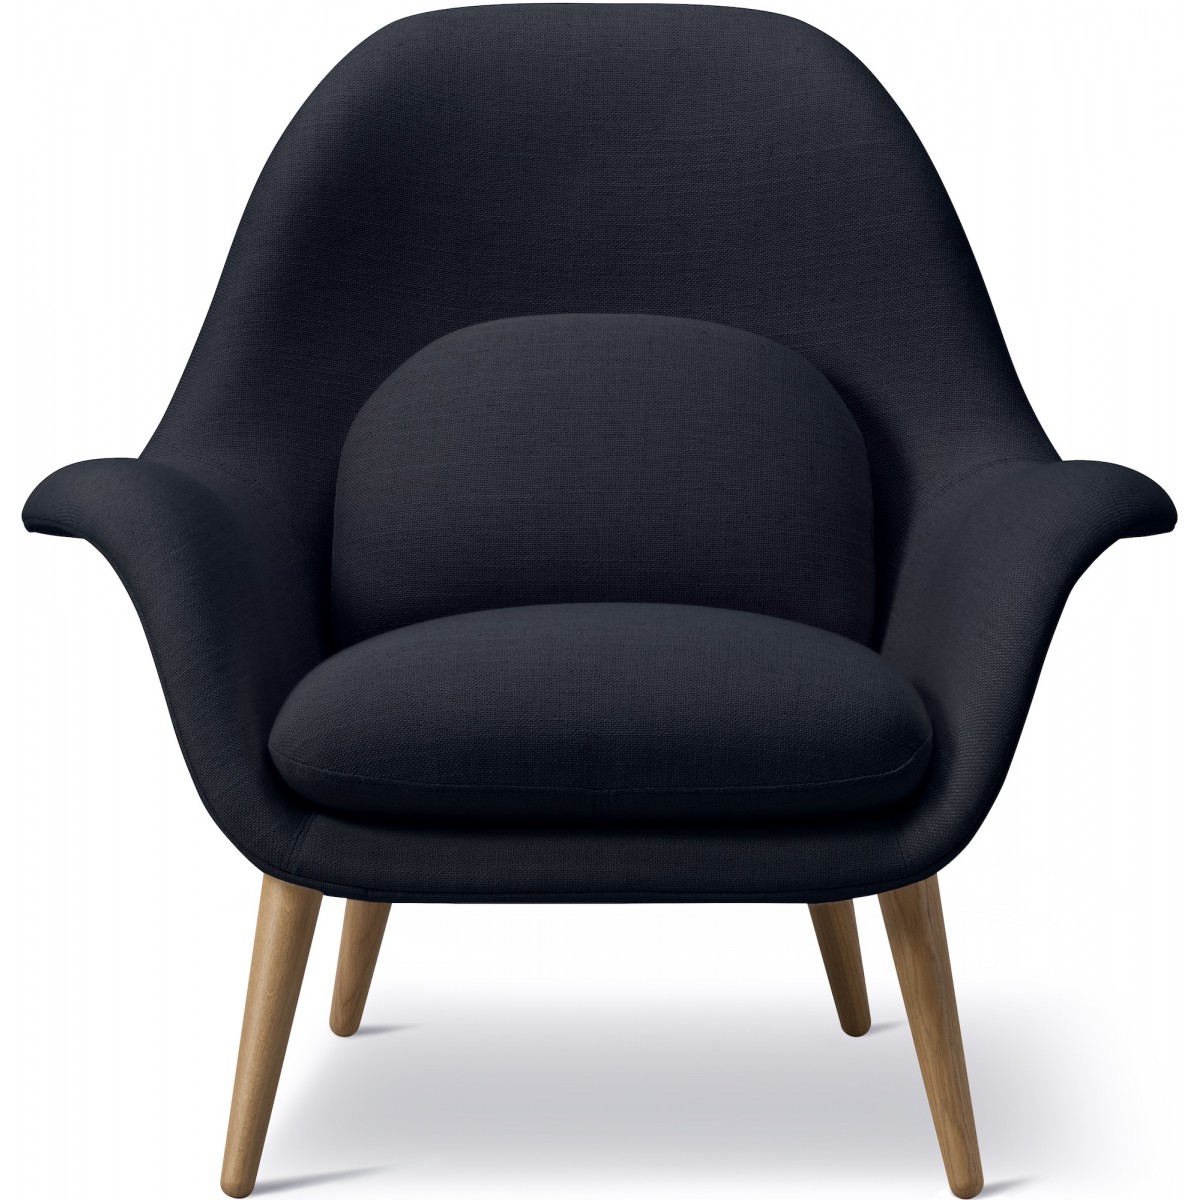 SOLD OUT Sunniva 192 + lacquered oak - Swoon lounge chair